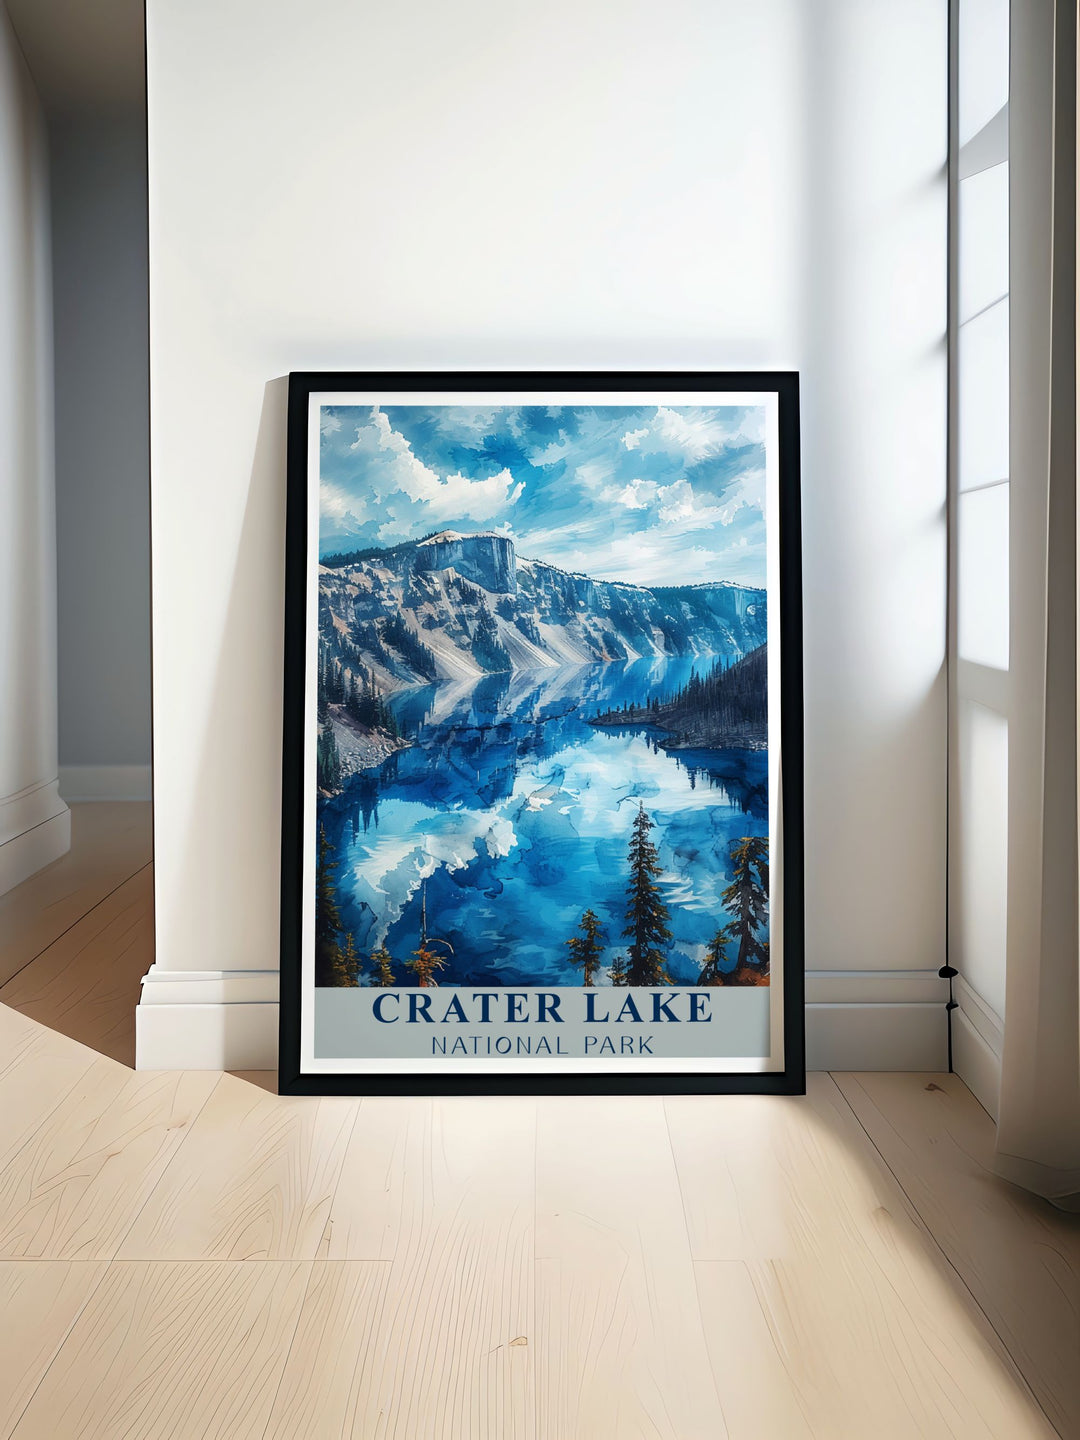 Beautiful Caldera Travel Prints showcasing the serene landscapes of Crater Lake. Perfect for home decor and gifting to nature lovers. High quality Crater Lake Posters capturing the deep blue waters and stunning caldera formations for a timeless addition to any space.